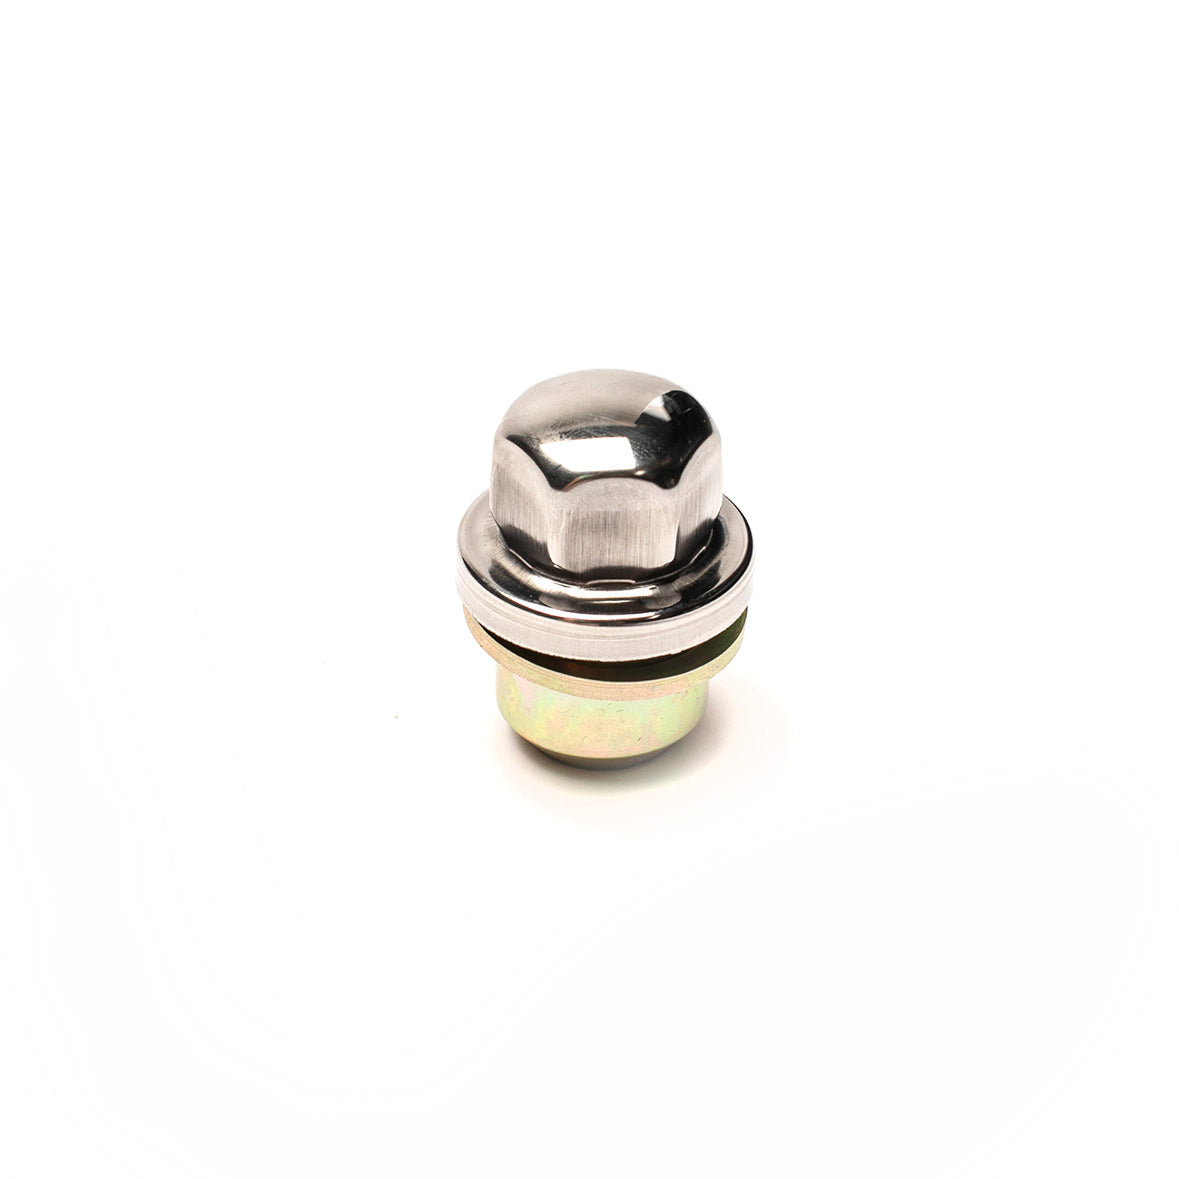 Stainless Steel Capped Alloy Wheel Nut